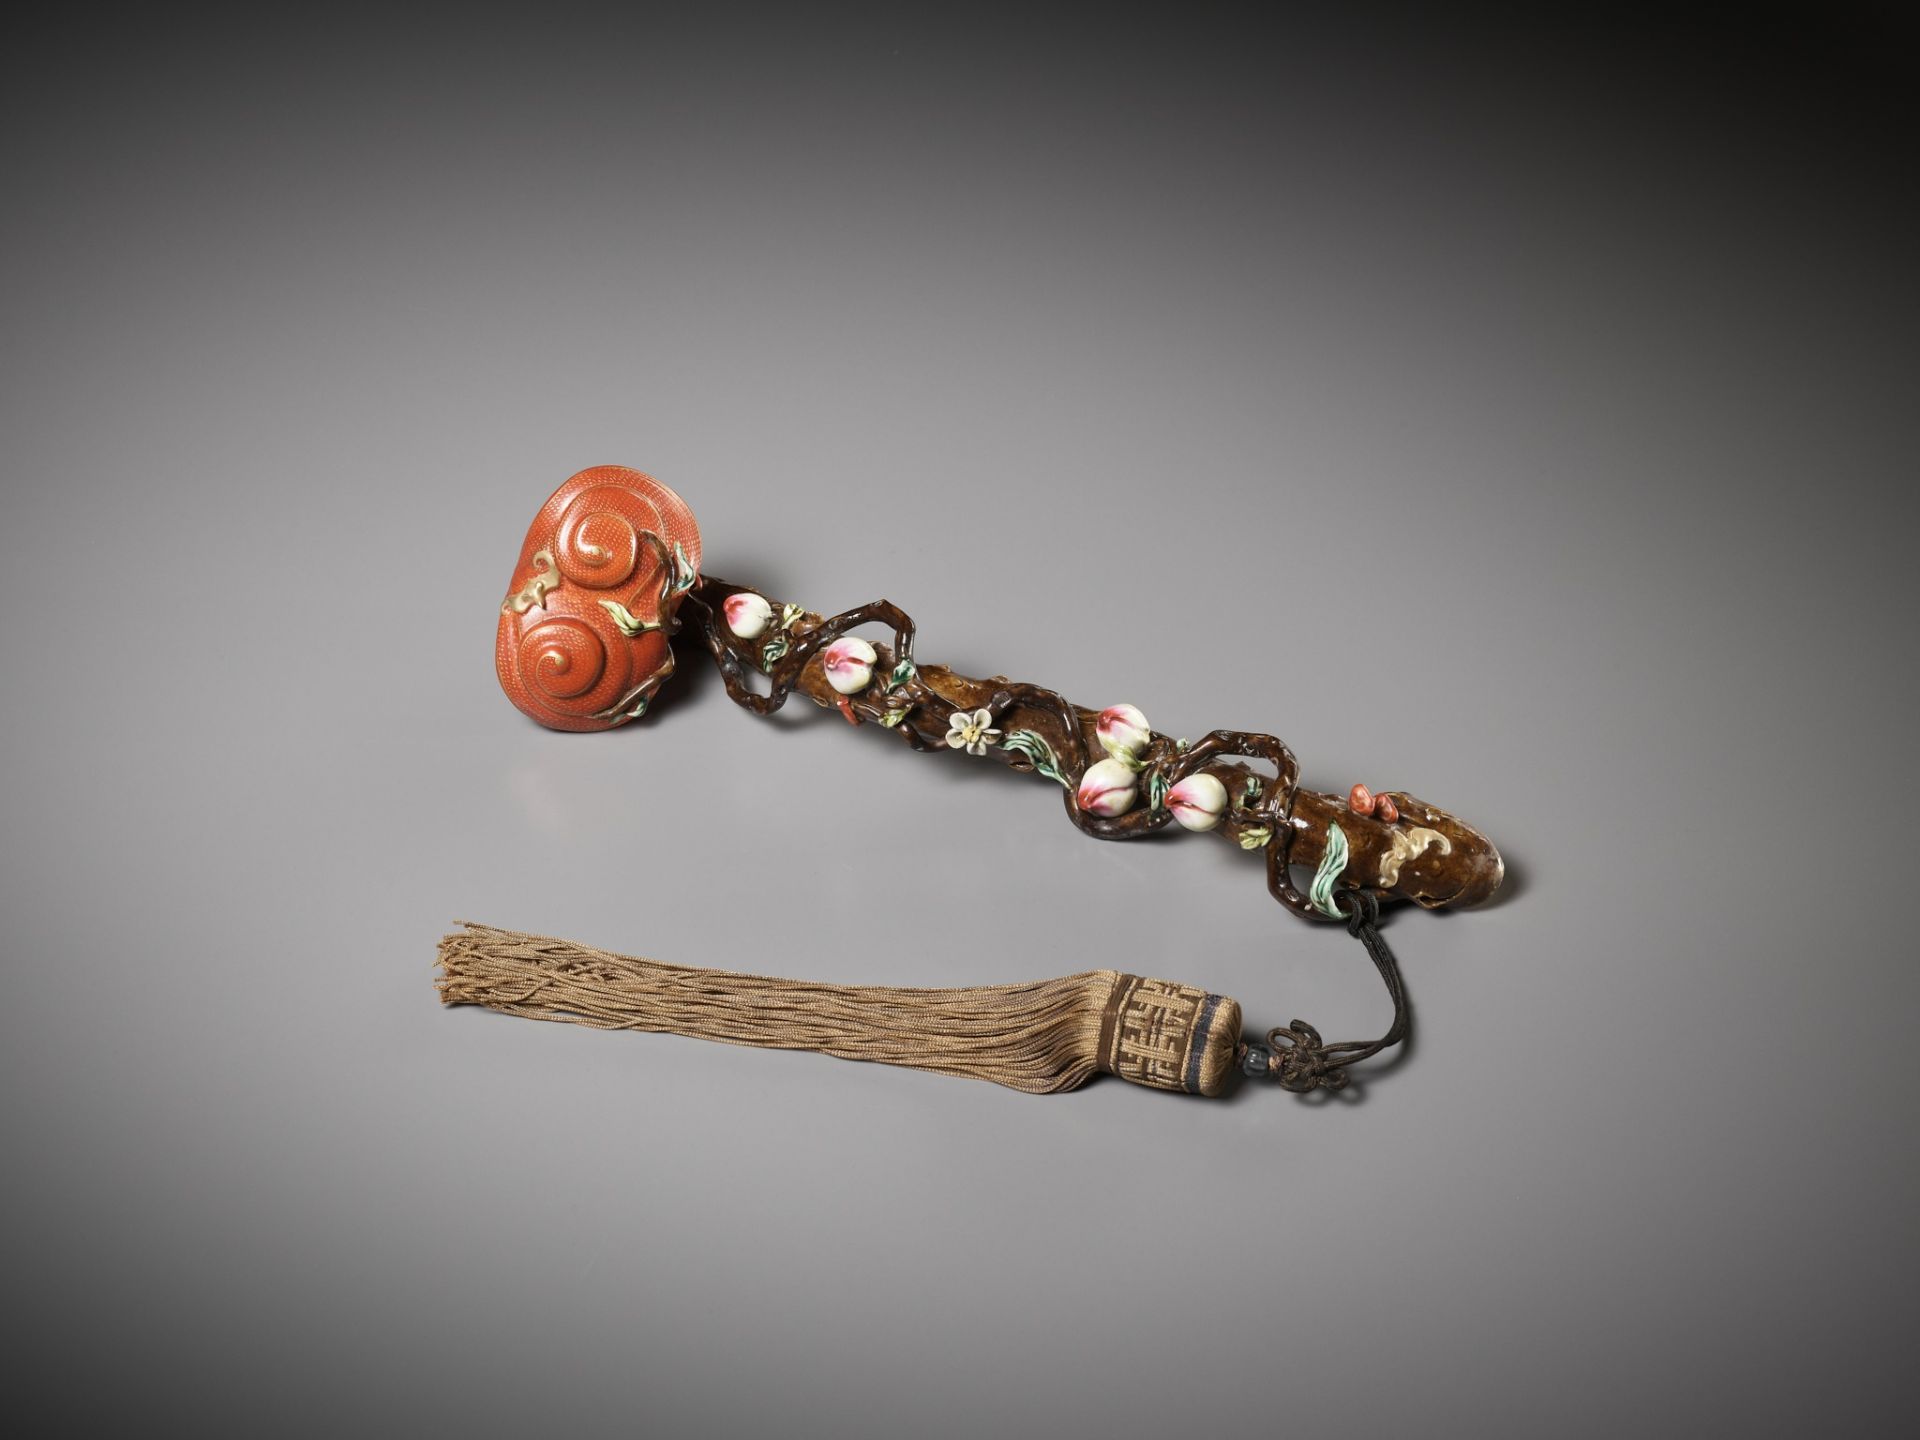 A FAMILLE ROSE PORCELAIN 'LINGZHI' RUYI SCEPTER, MID-QING DYNASTY - Image 8 of 12